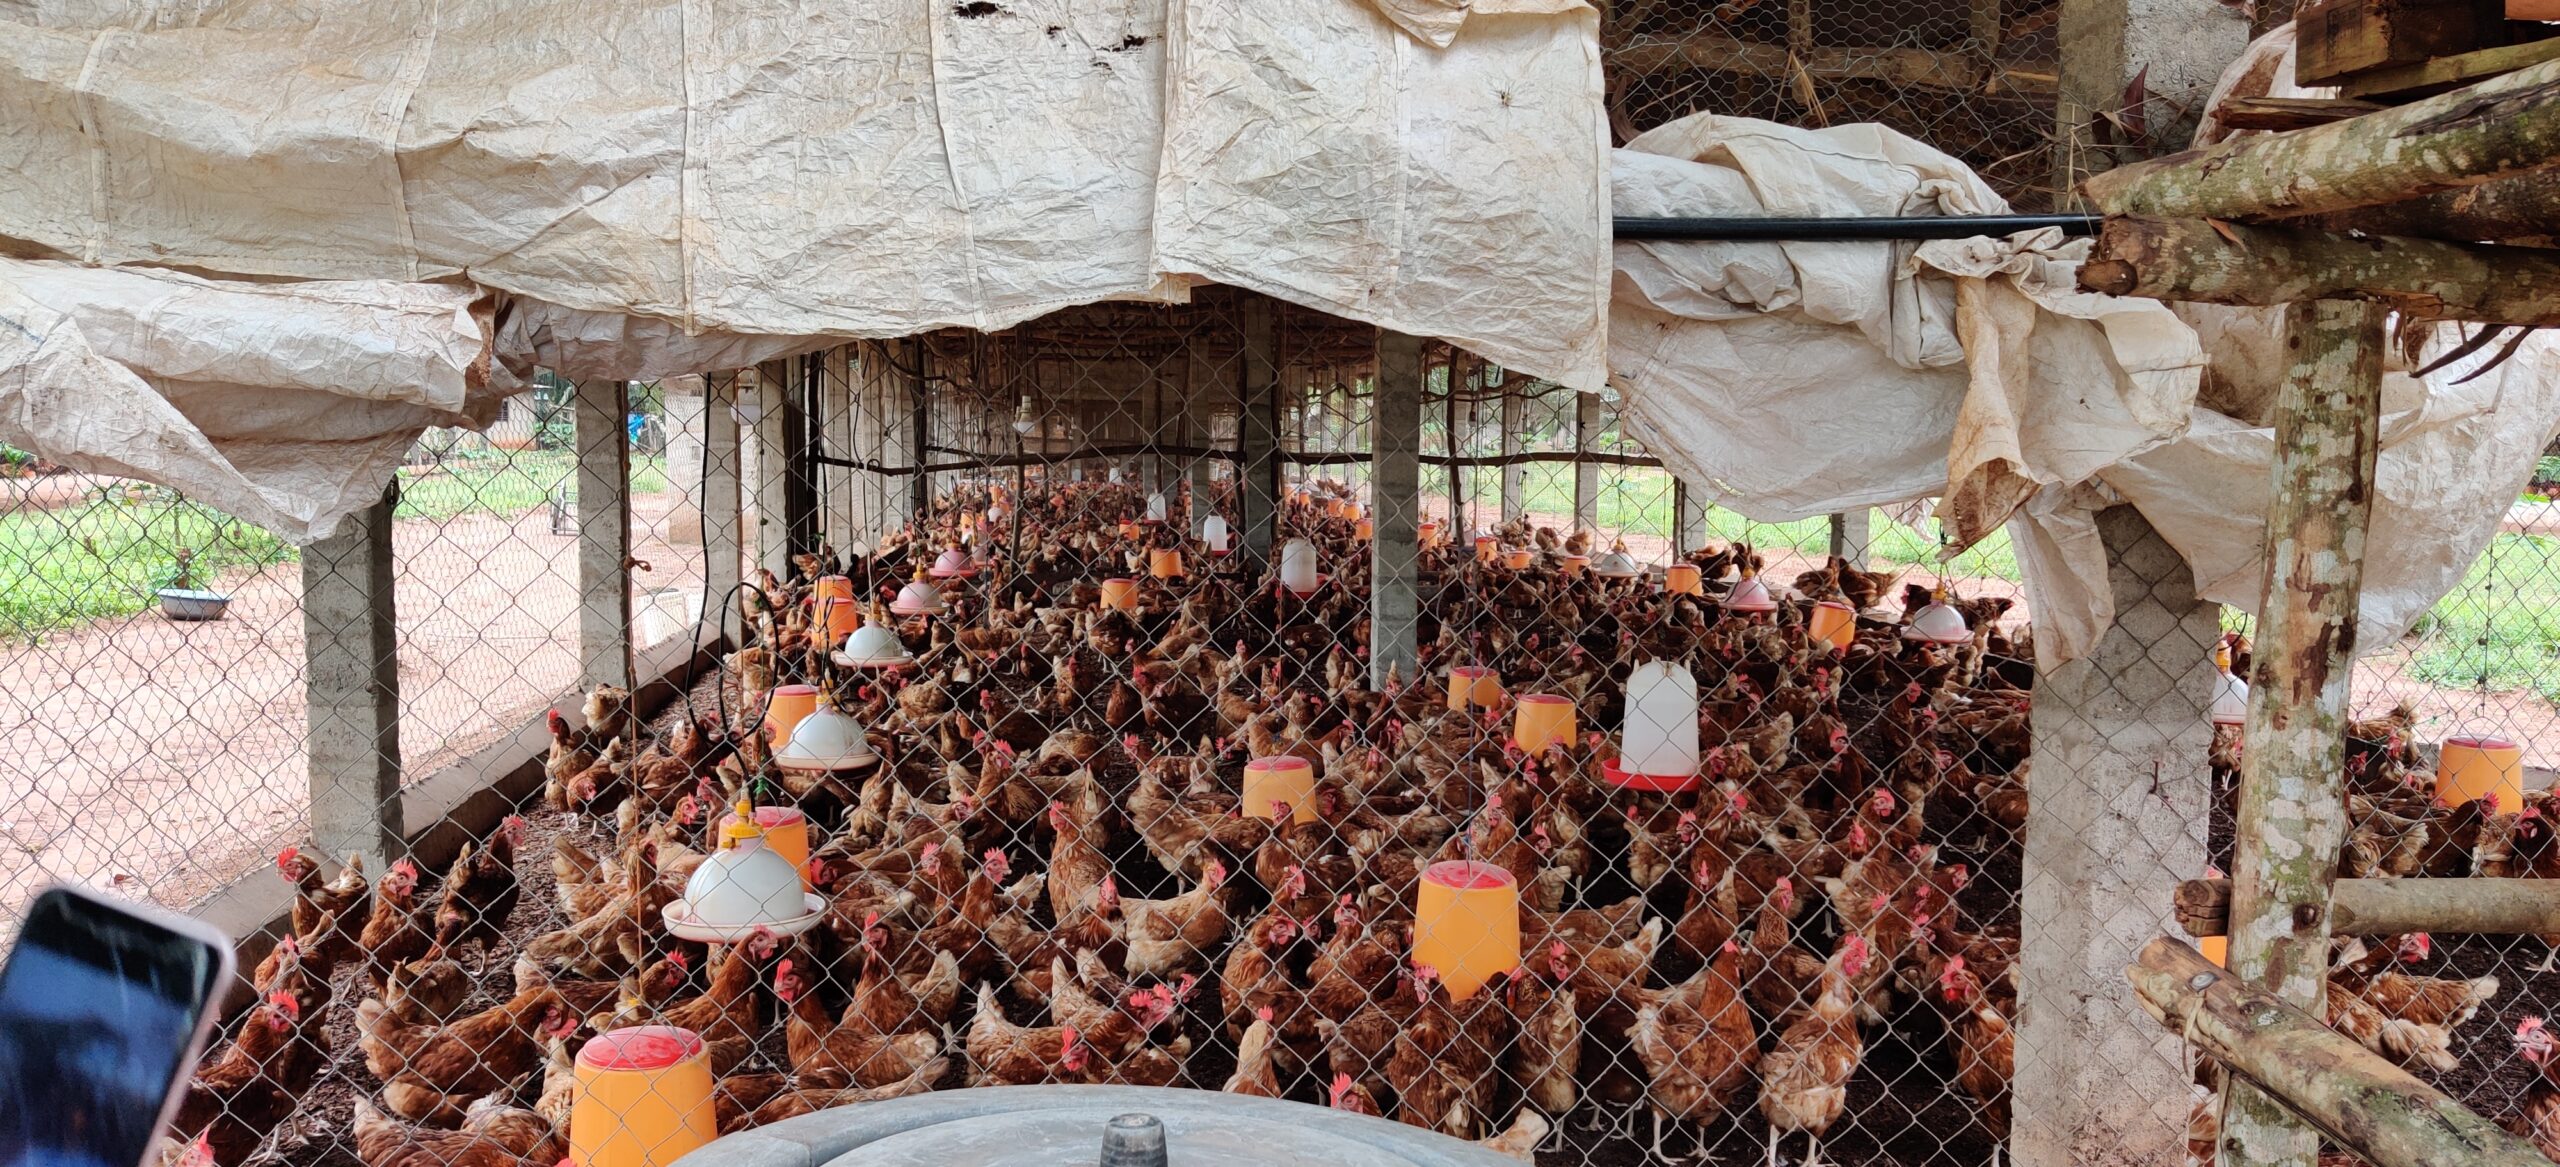 Crowded chicken coops are a key site for the spread of infectious diseases.